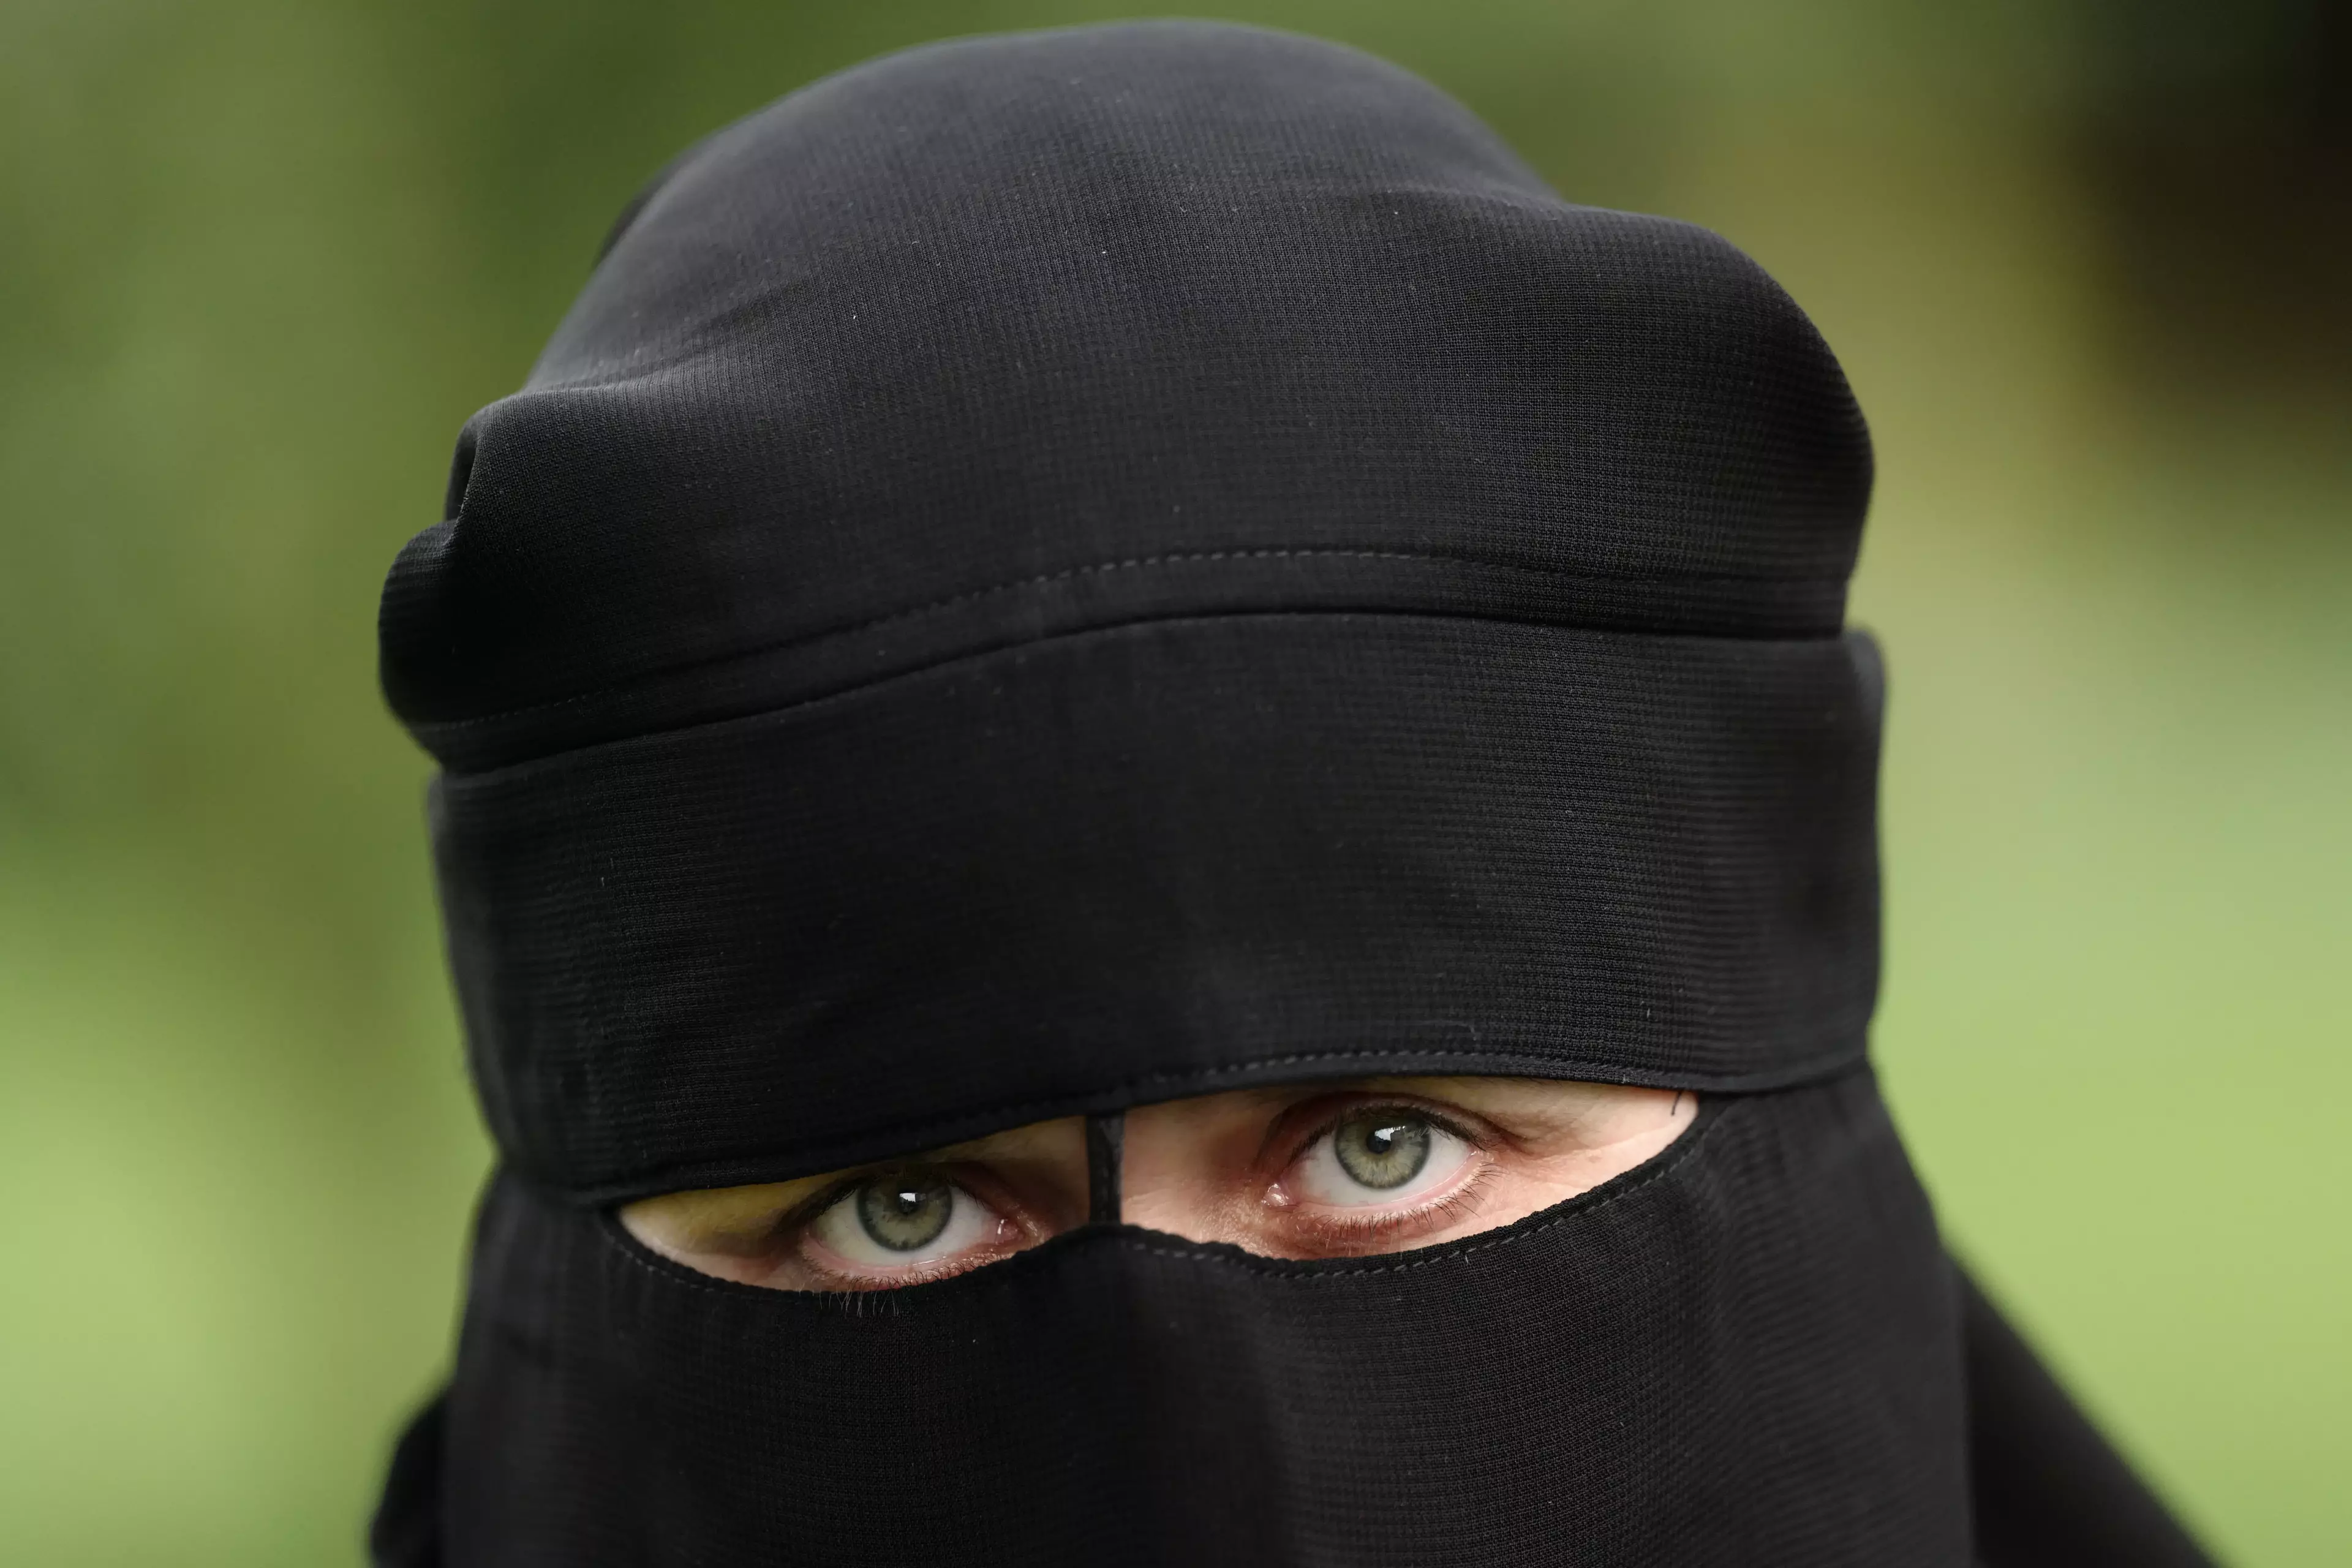 The Netherlands Becomes The Most Recent European Country To Ban 'Face-Covering' Veils